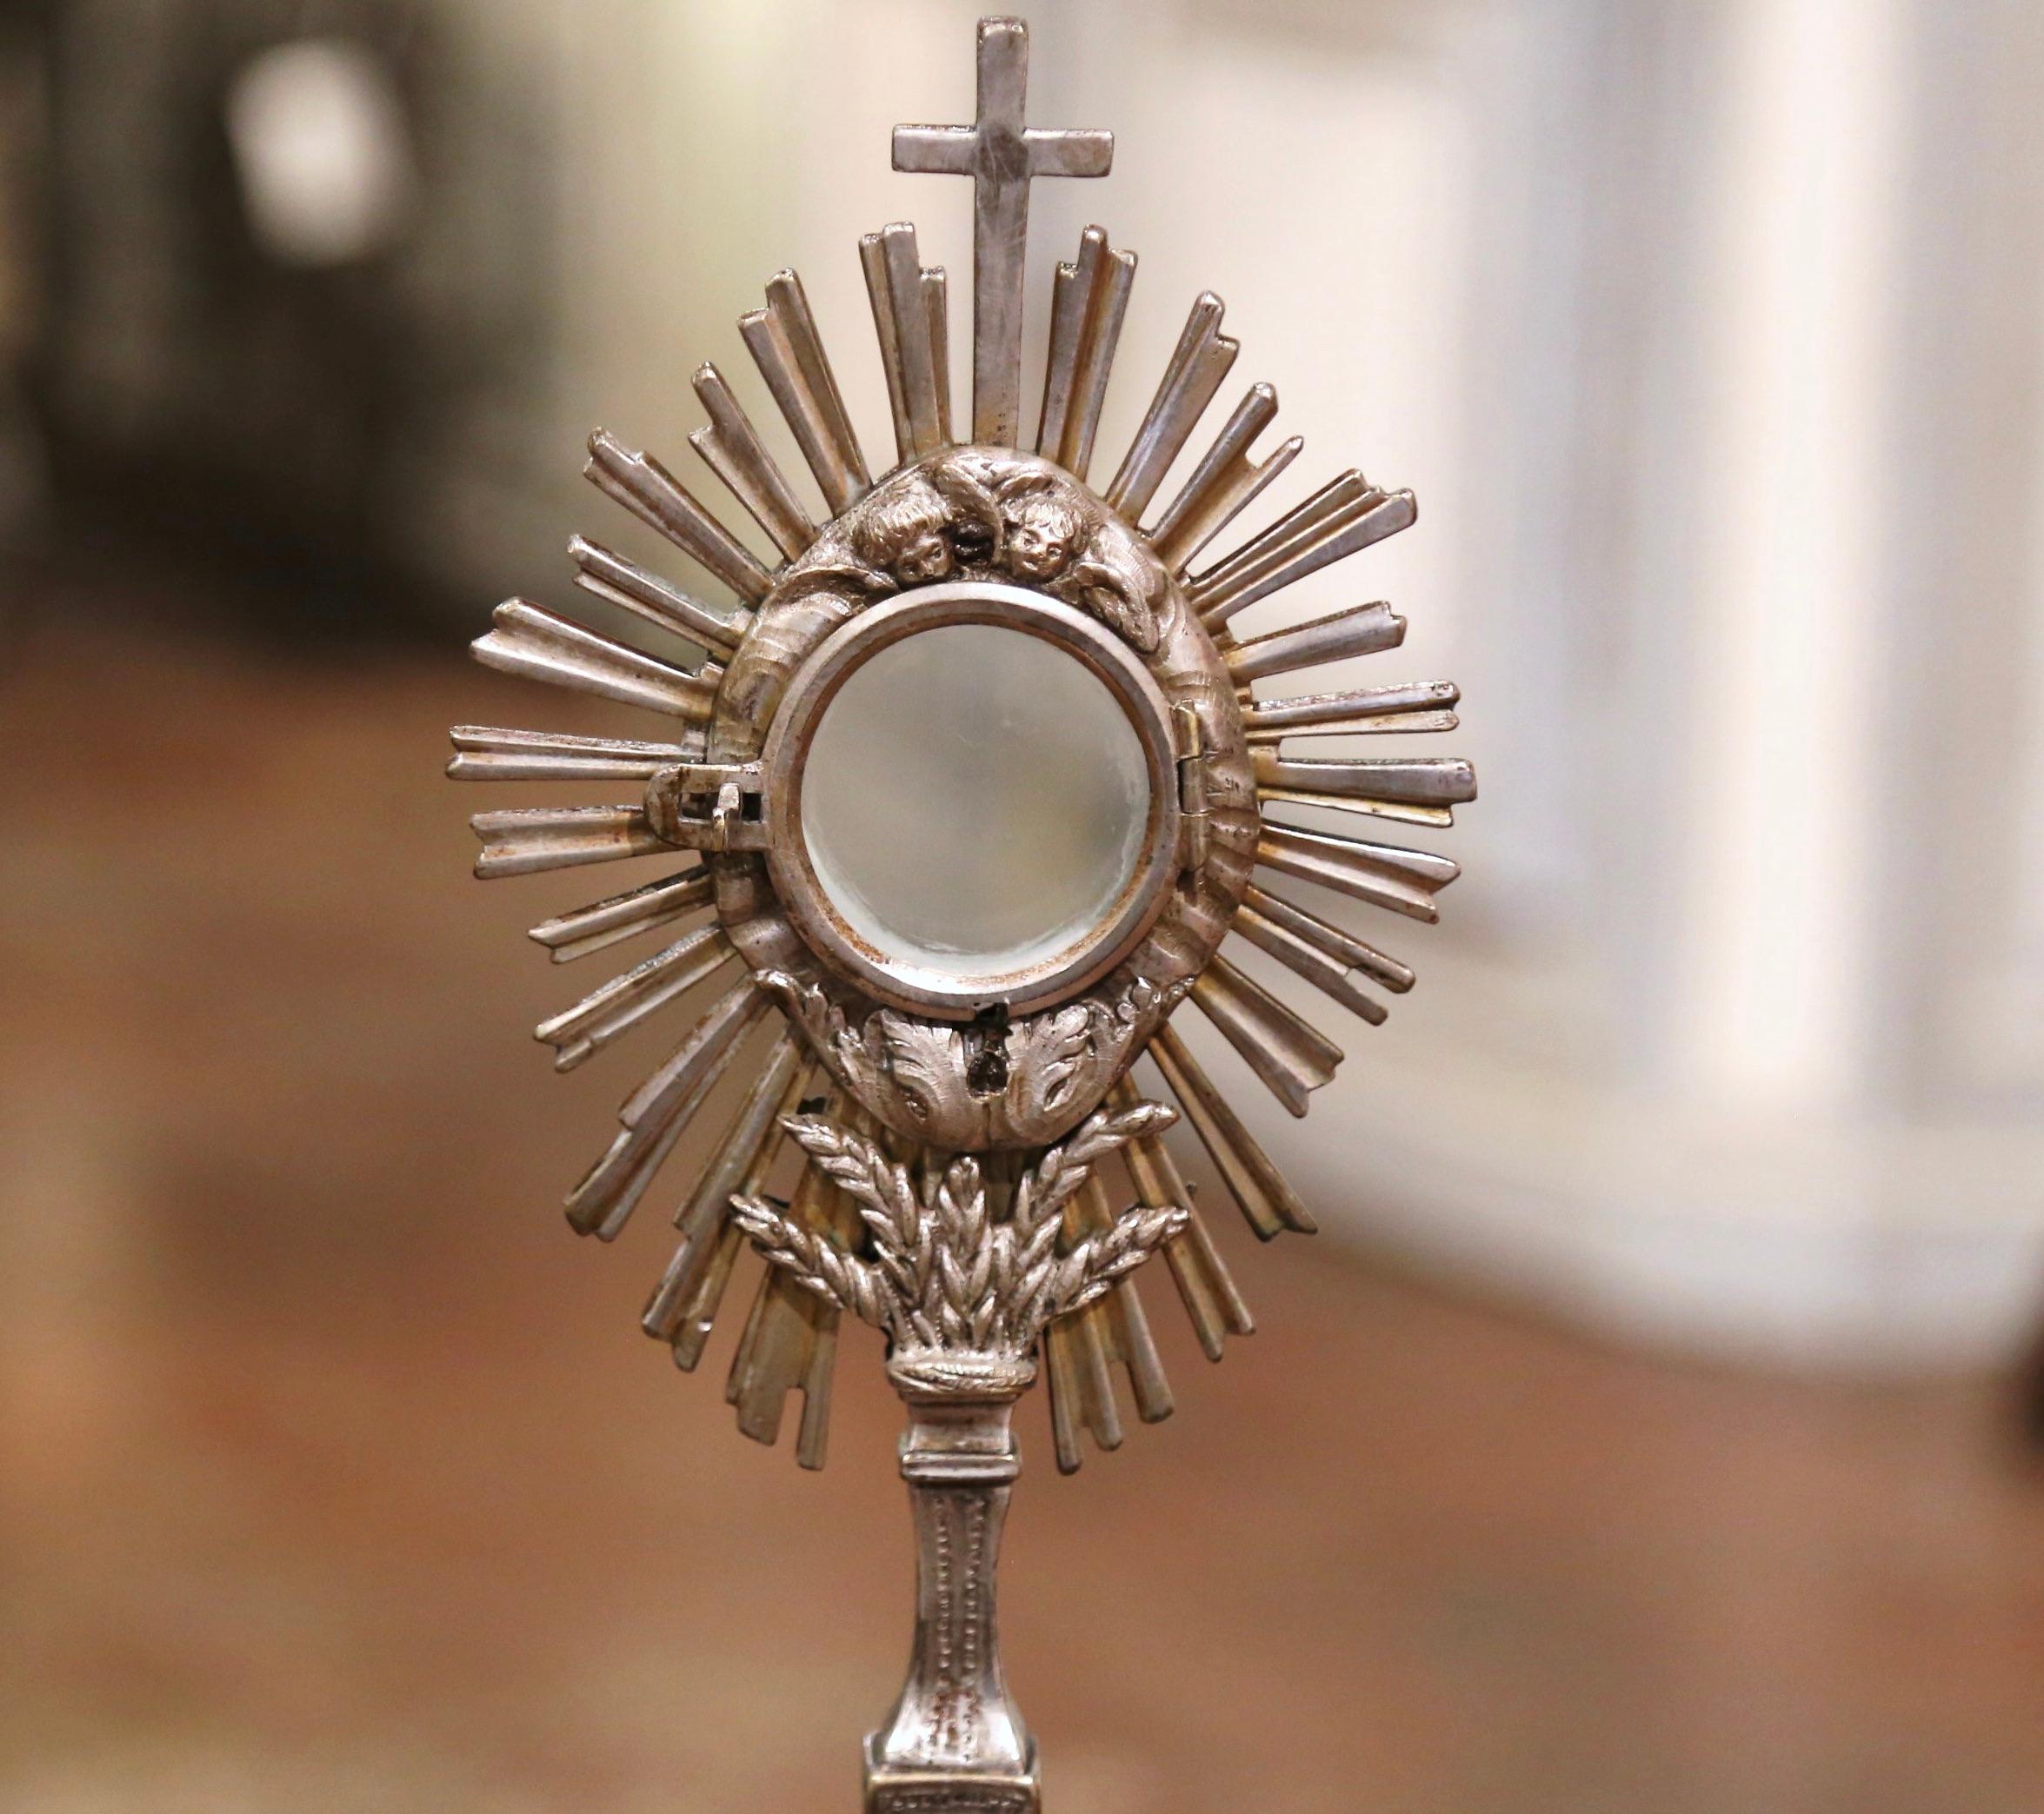 Hand-Crafted 19th Century French Bronze Silvered Catholic Monstrance with Cross & Wheat Decor